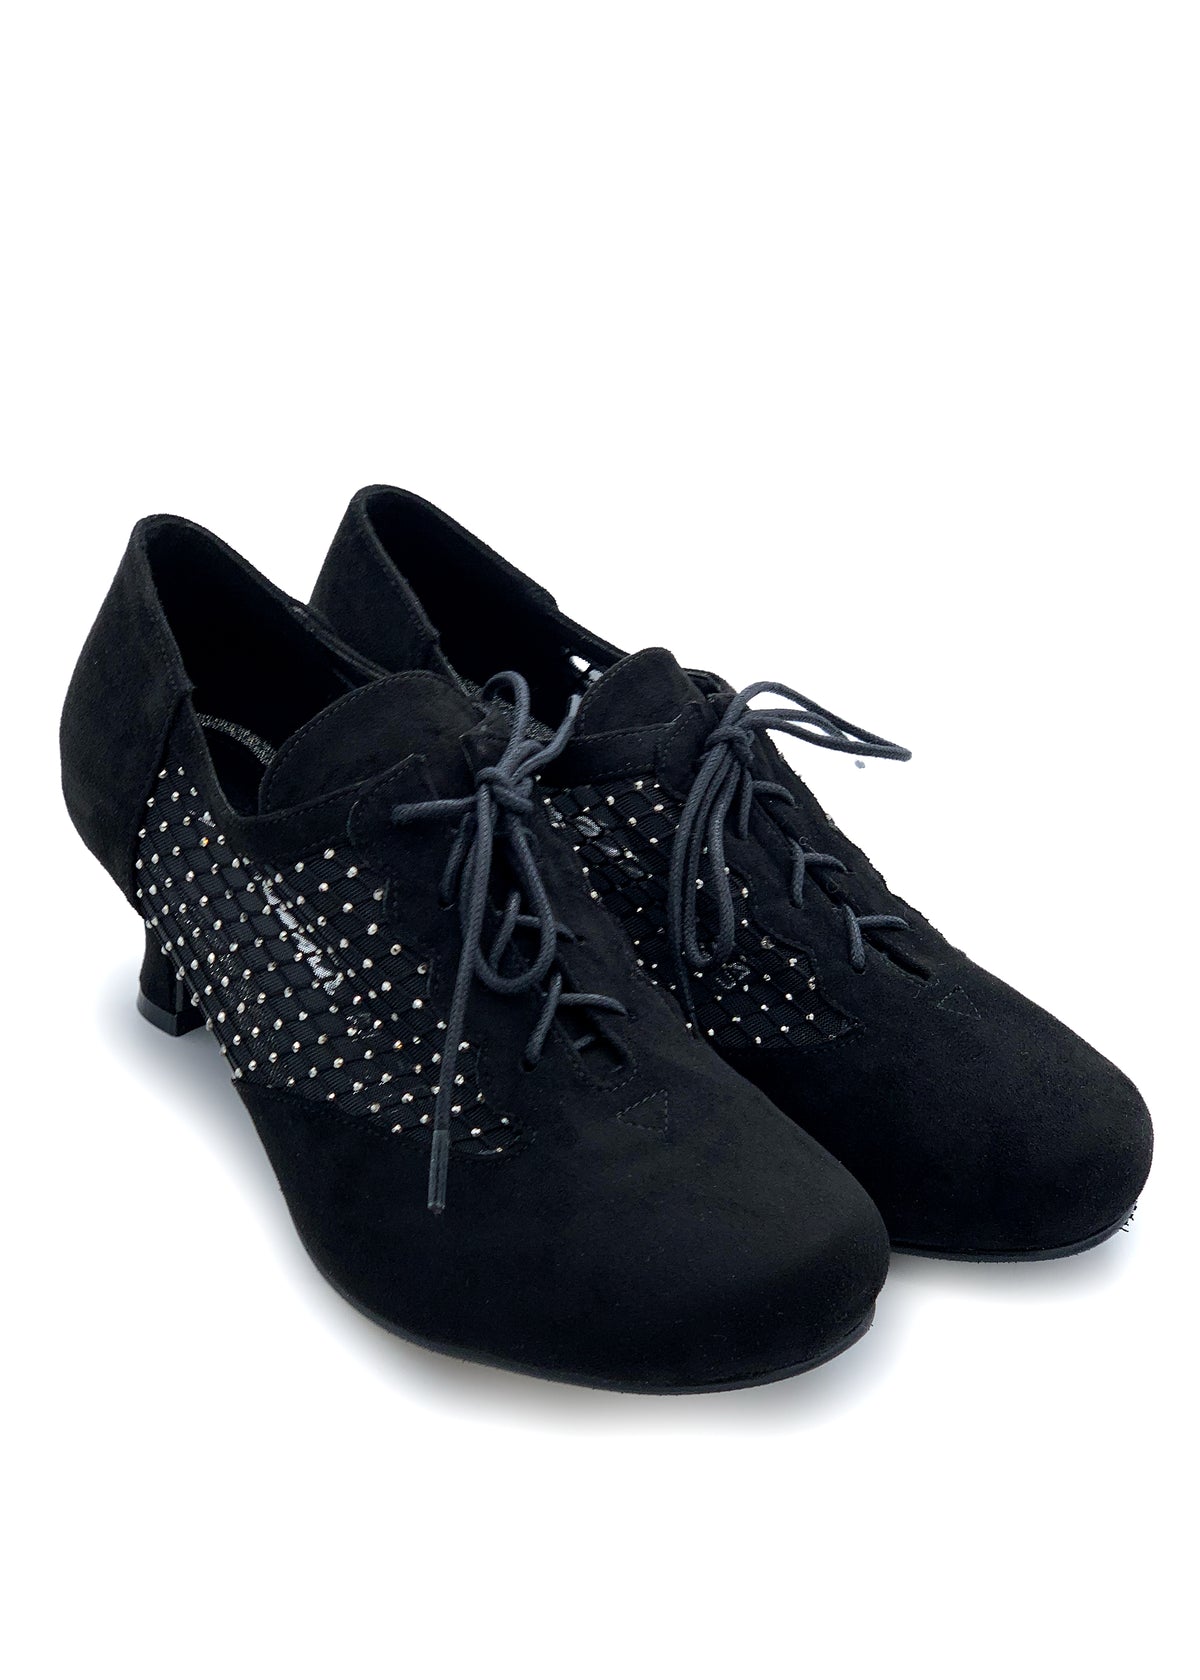 Party Walking shoes - black fabric, diamond mesh on the sides, wide lace